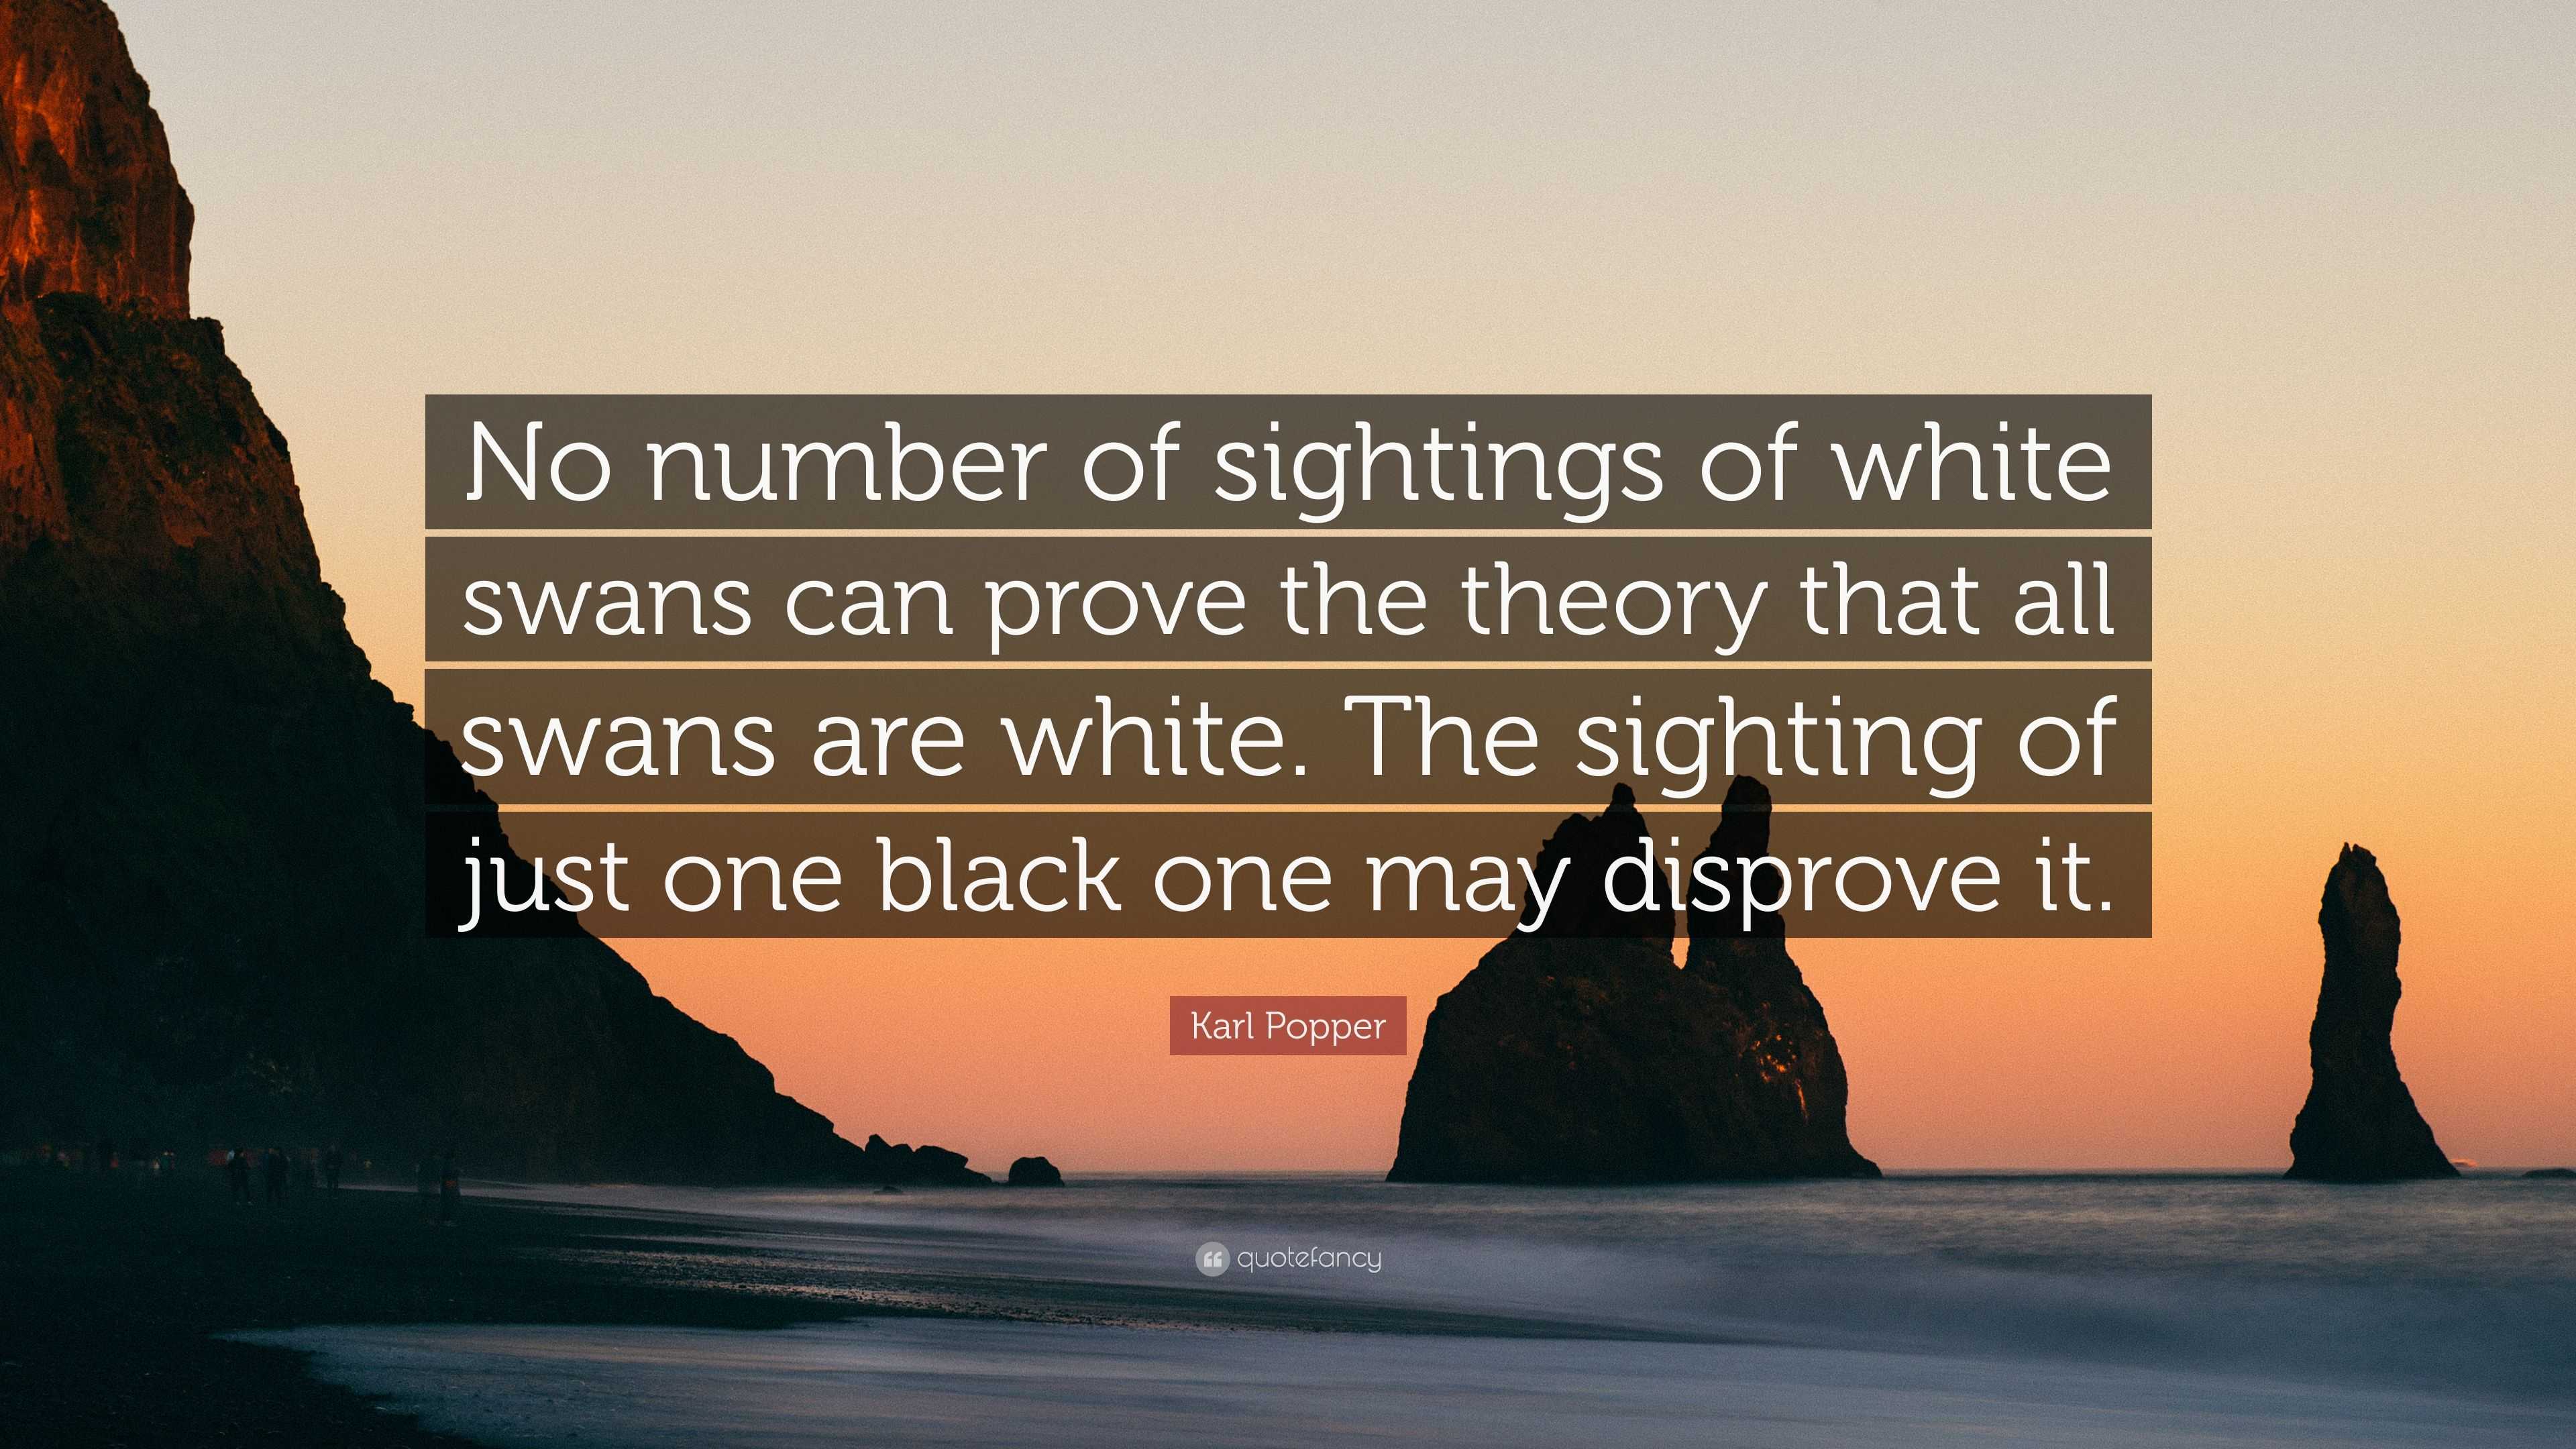 Karl Popper Quote: “No number of sightings of white swans can prove the theory that all are white. The sighting of just one one ...”